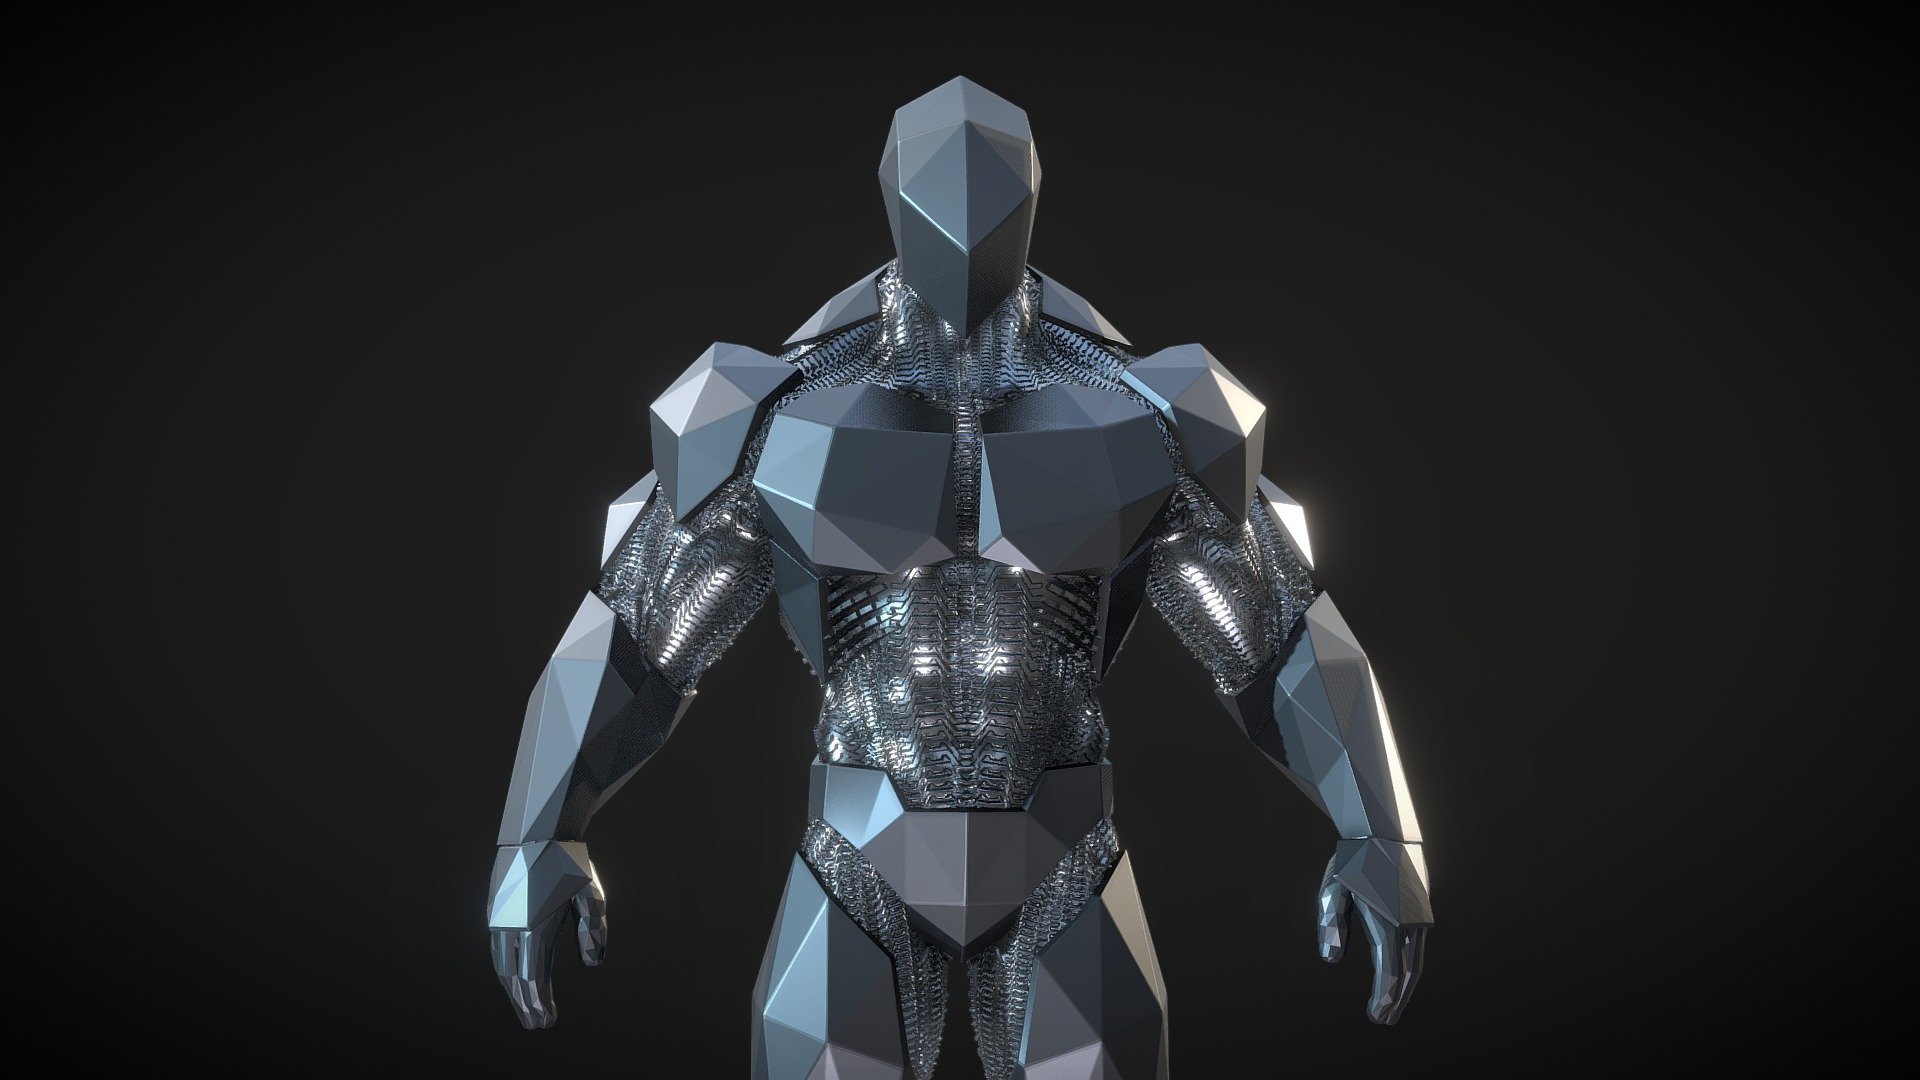 Sketch
Zbrush
Just exploring quick ways in 3d modeling.
Inspired by Jerad S.Marantz 3d model